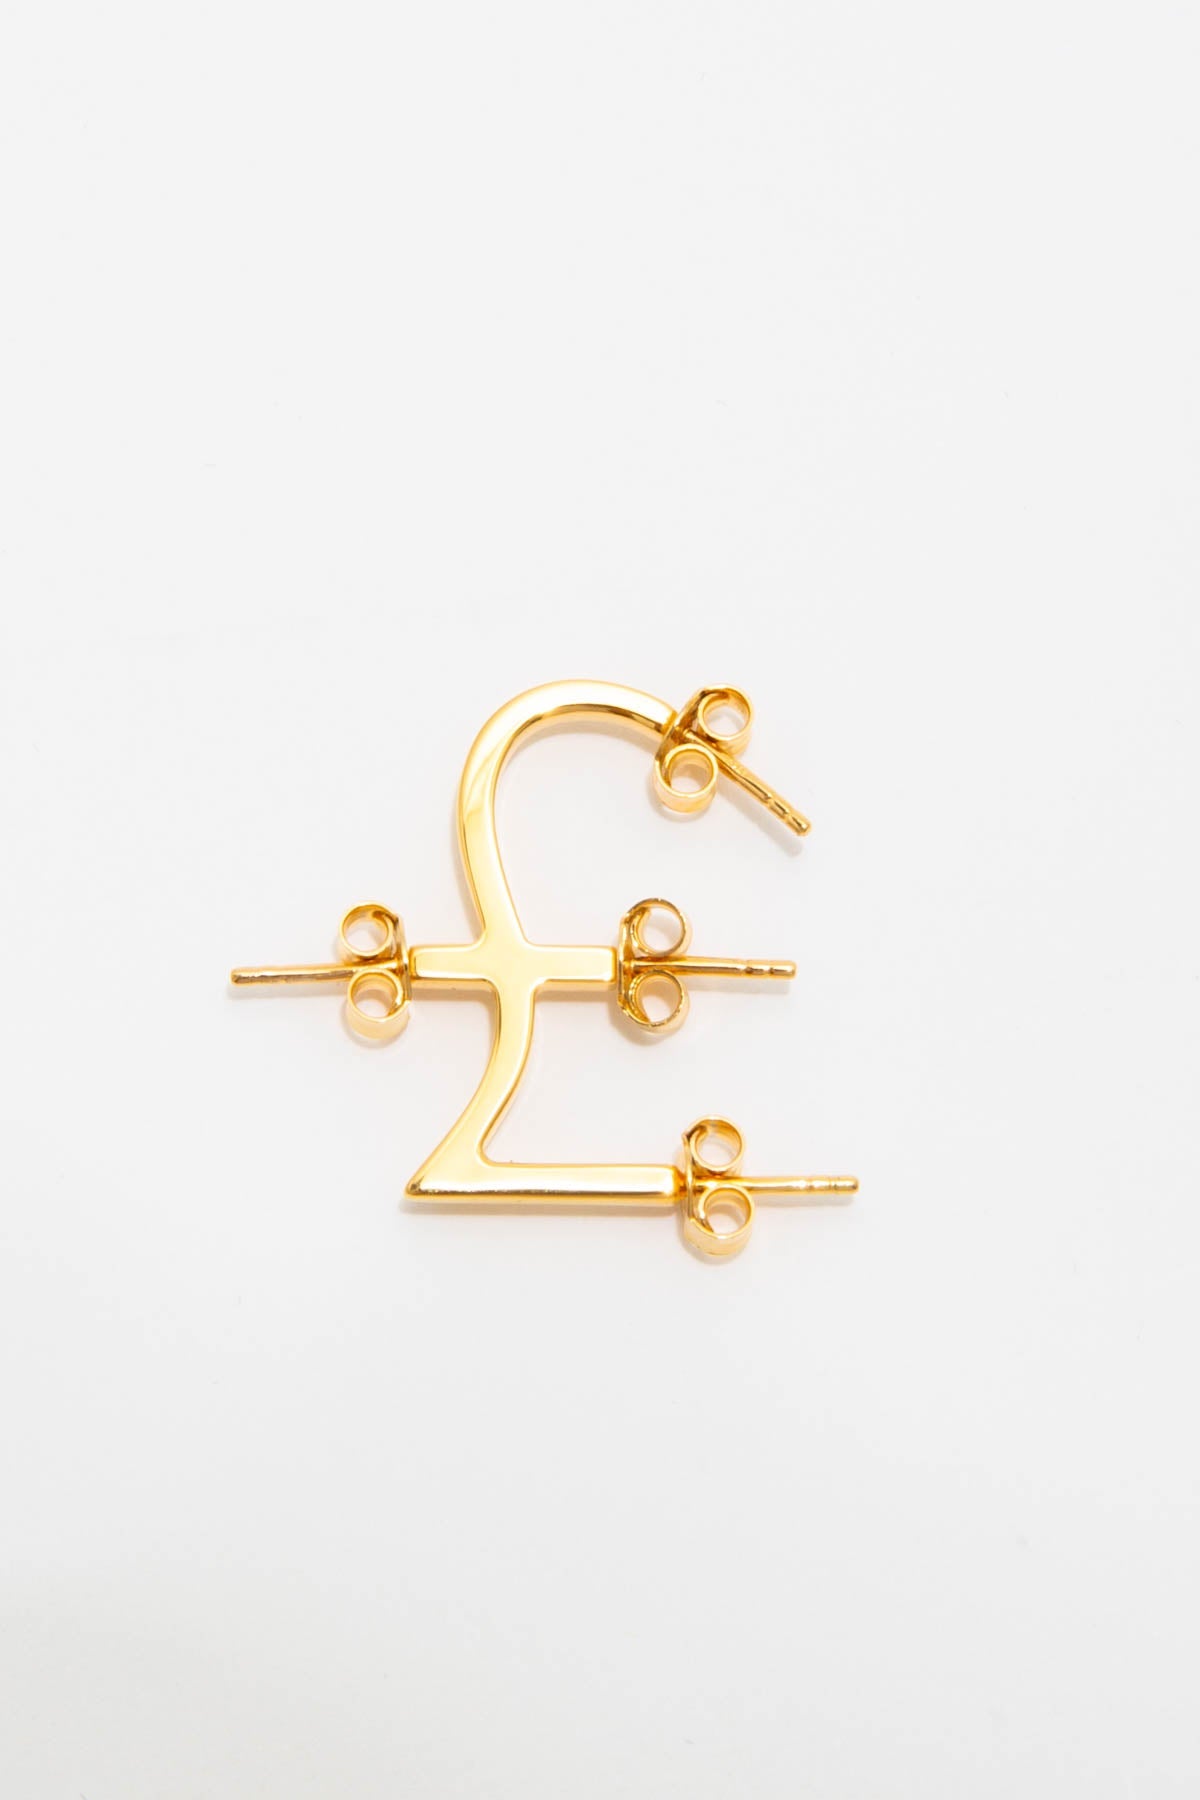 B213_Currency Earring Pound_L_02